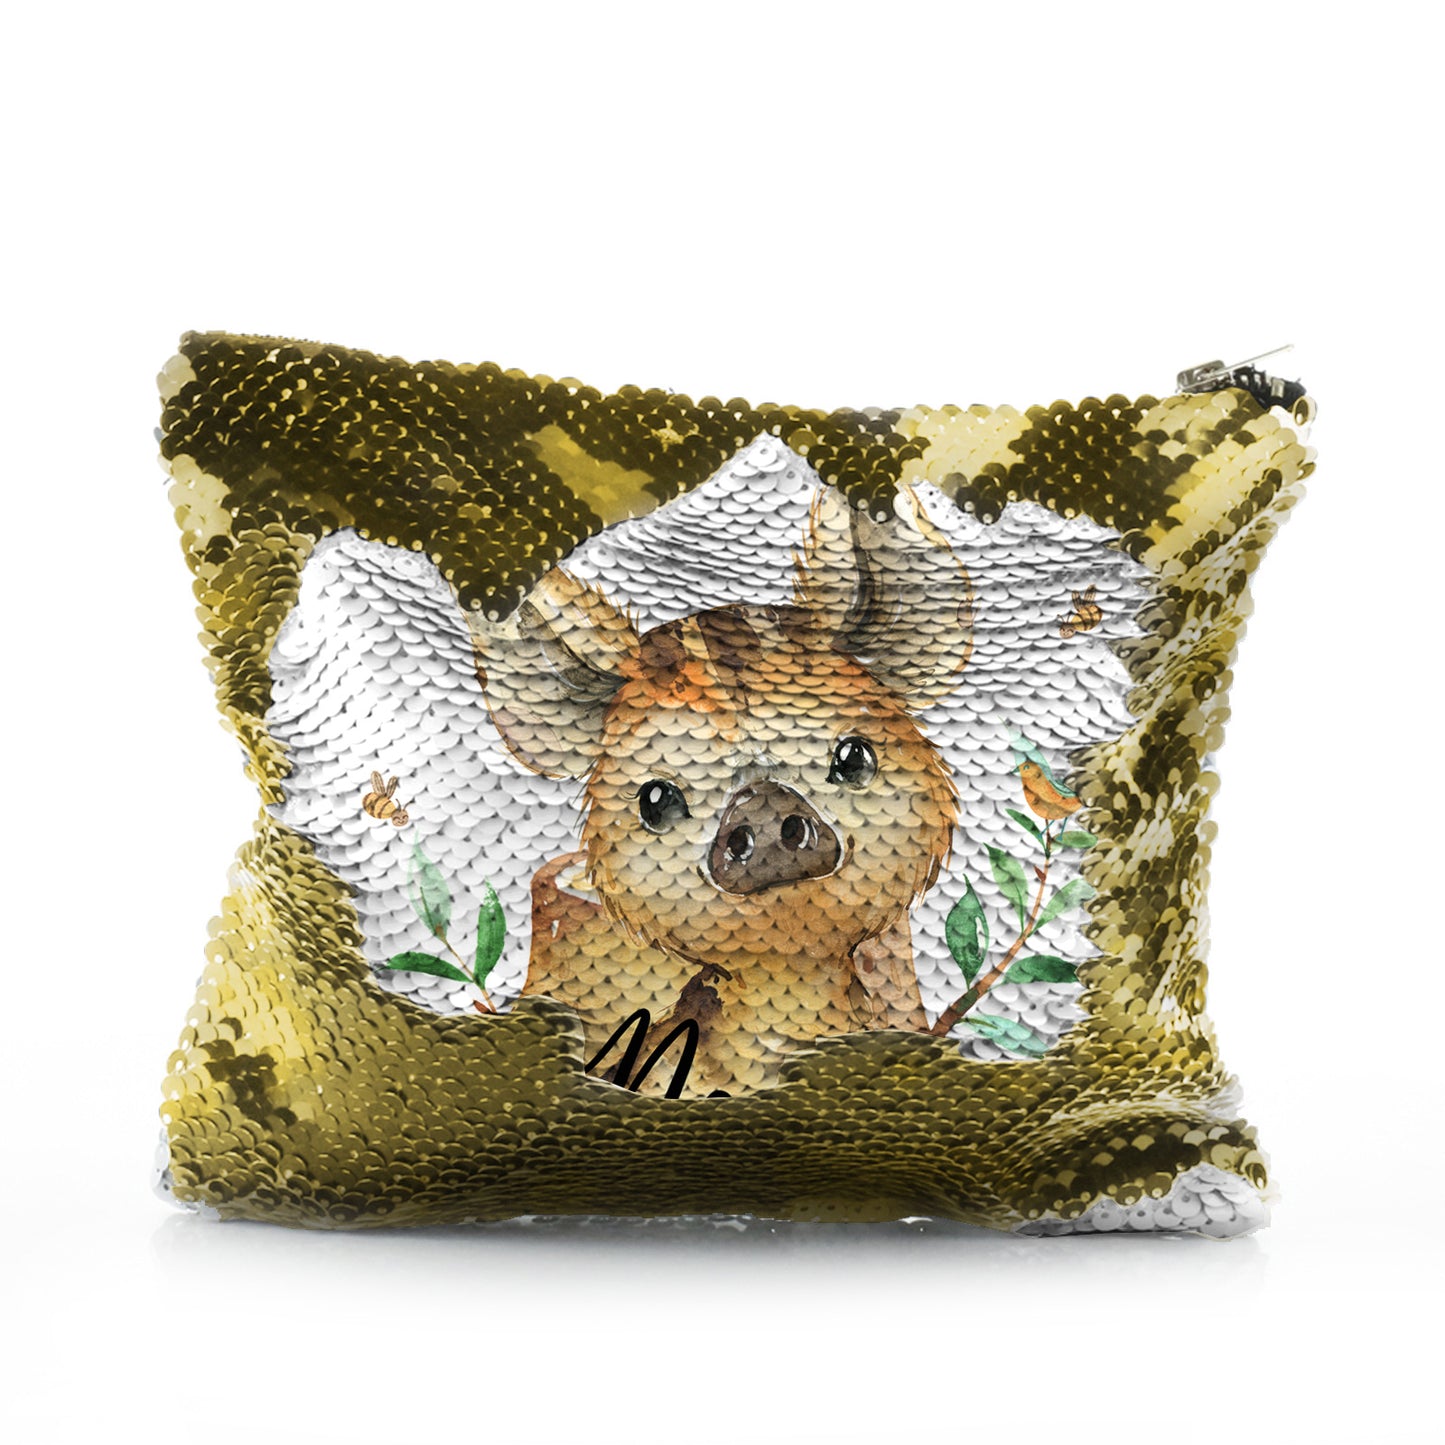 Personalised Sequin Zip Bag with Wild Boar Piglet with Bird and Bees and Cute Text